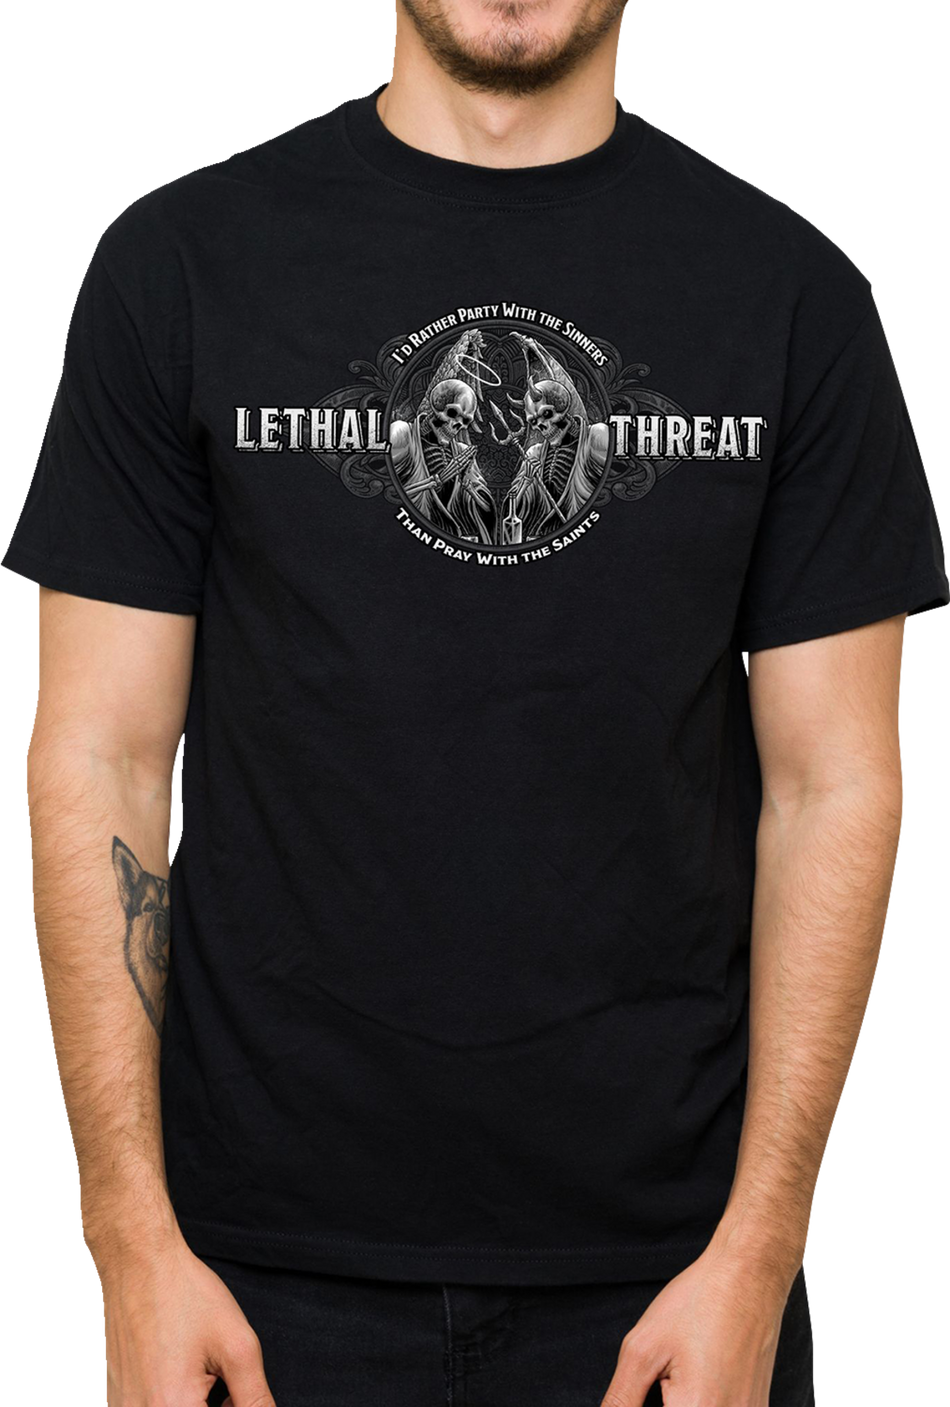 LETHAL THREAT Party with the Sinners T-Shirt - Black - Large LT20905L